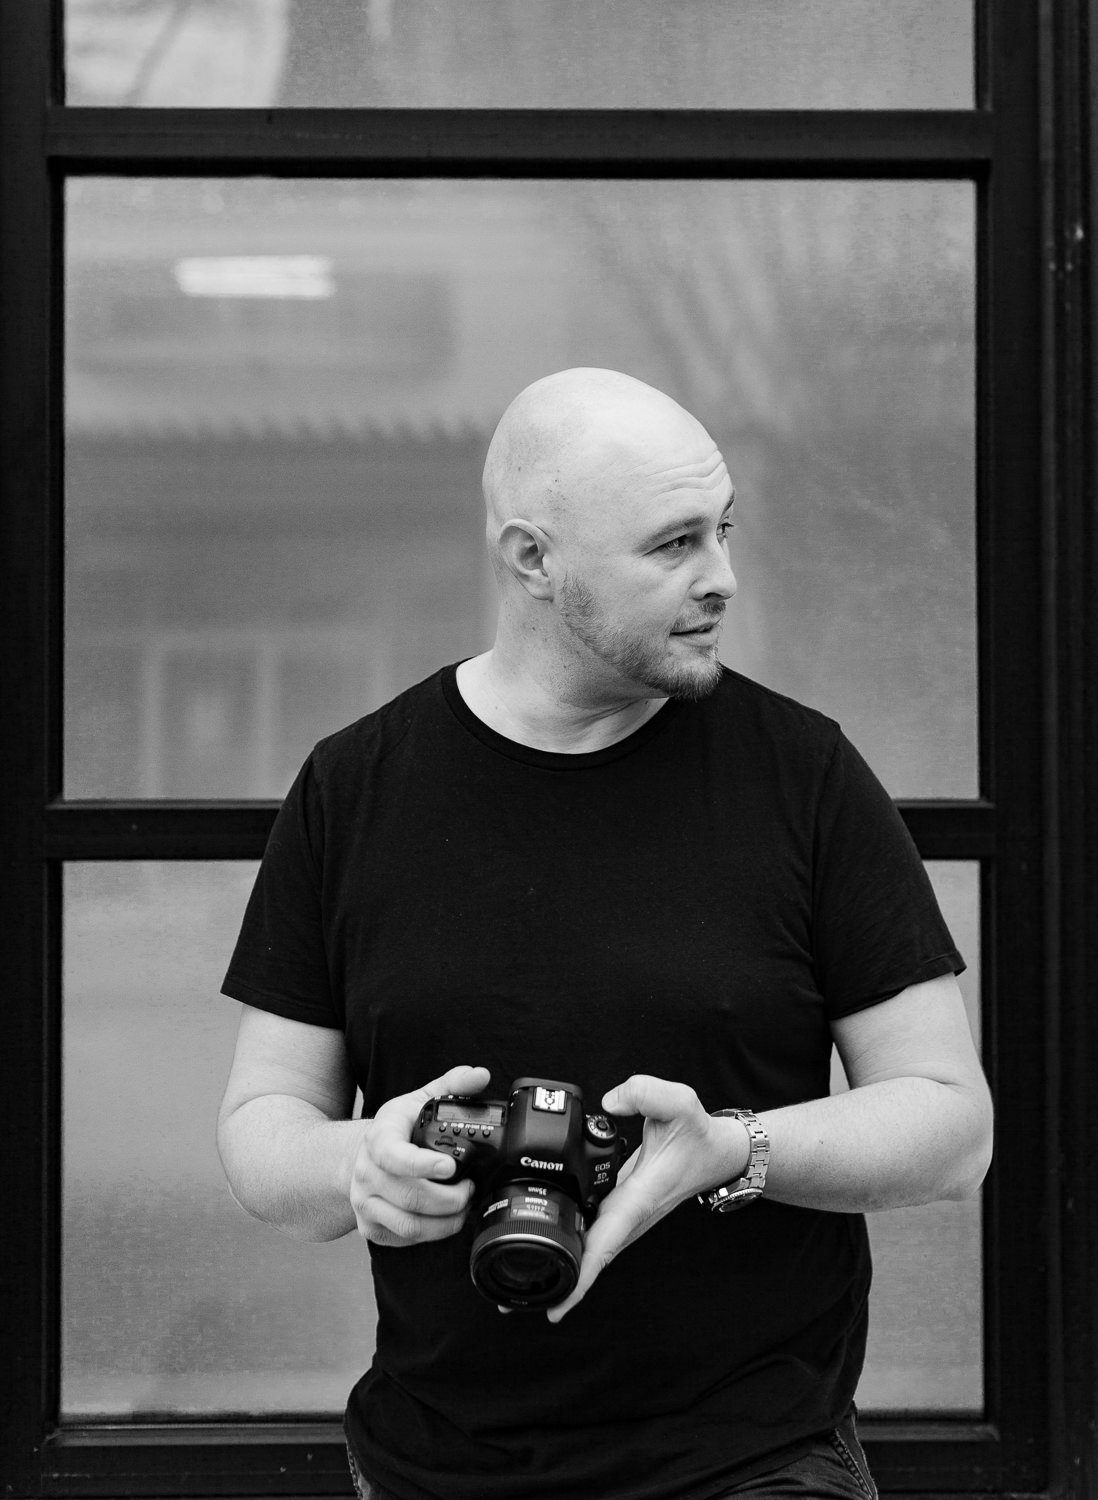 Portland Wedding Photographer Nate Meeds holding a camera in black and white